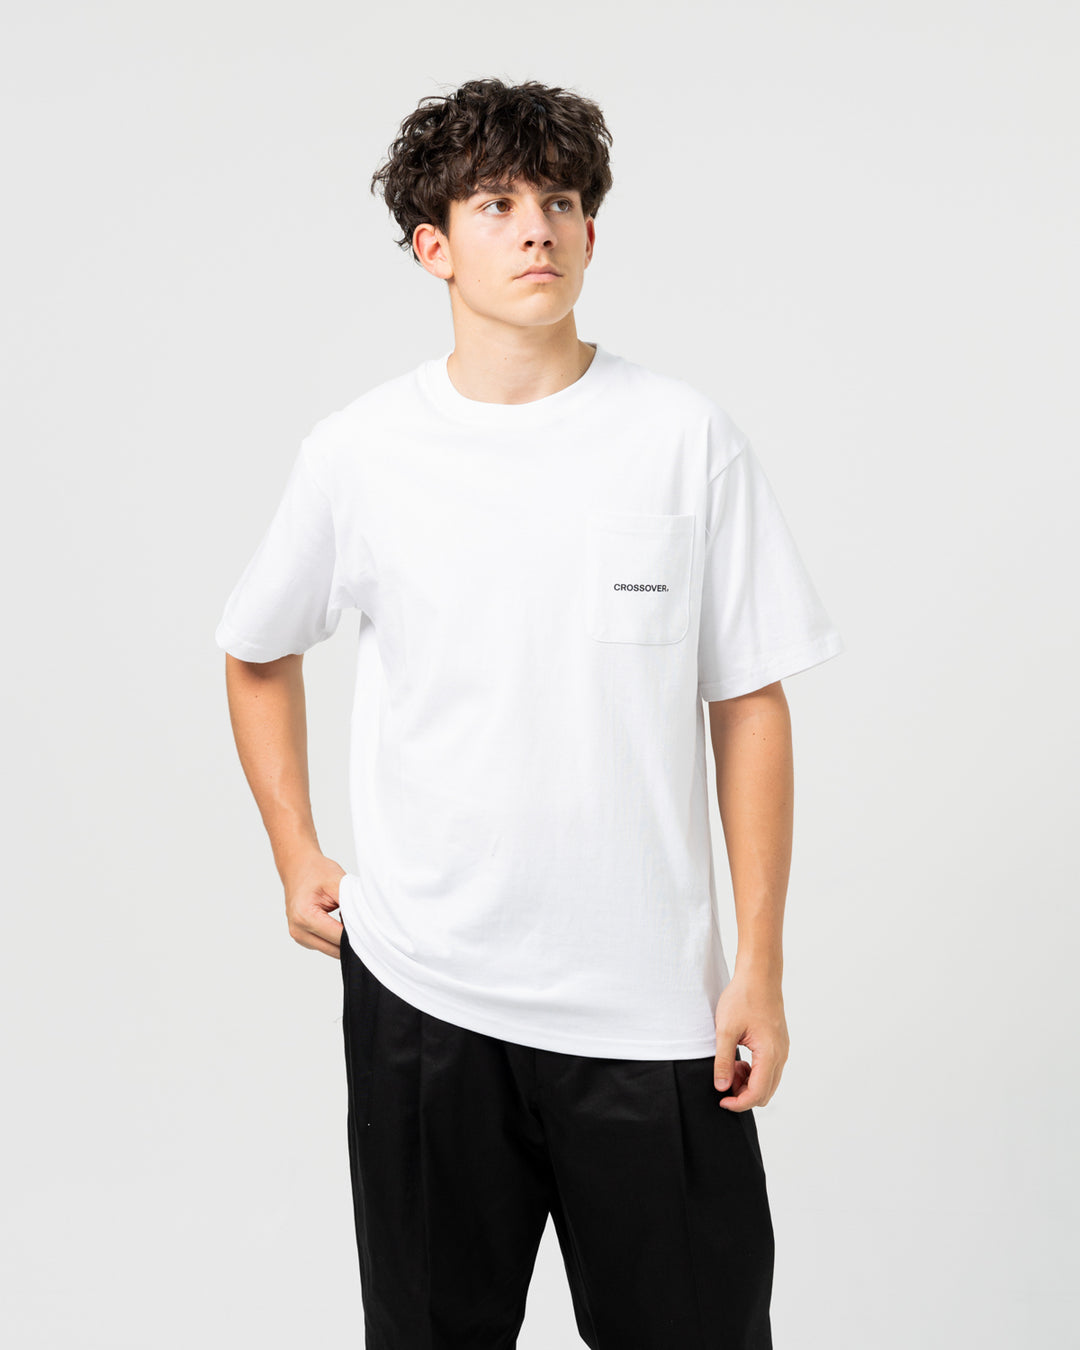 CROSSOVER "Year Of The Dragon" Pocket Tee | White